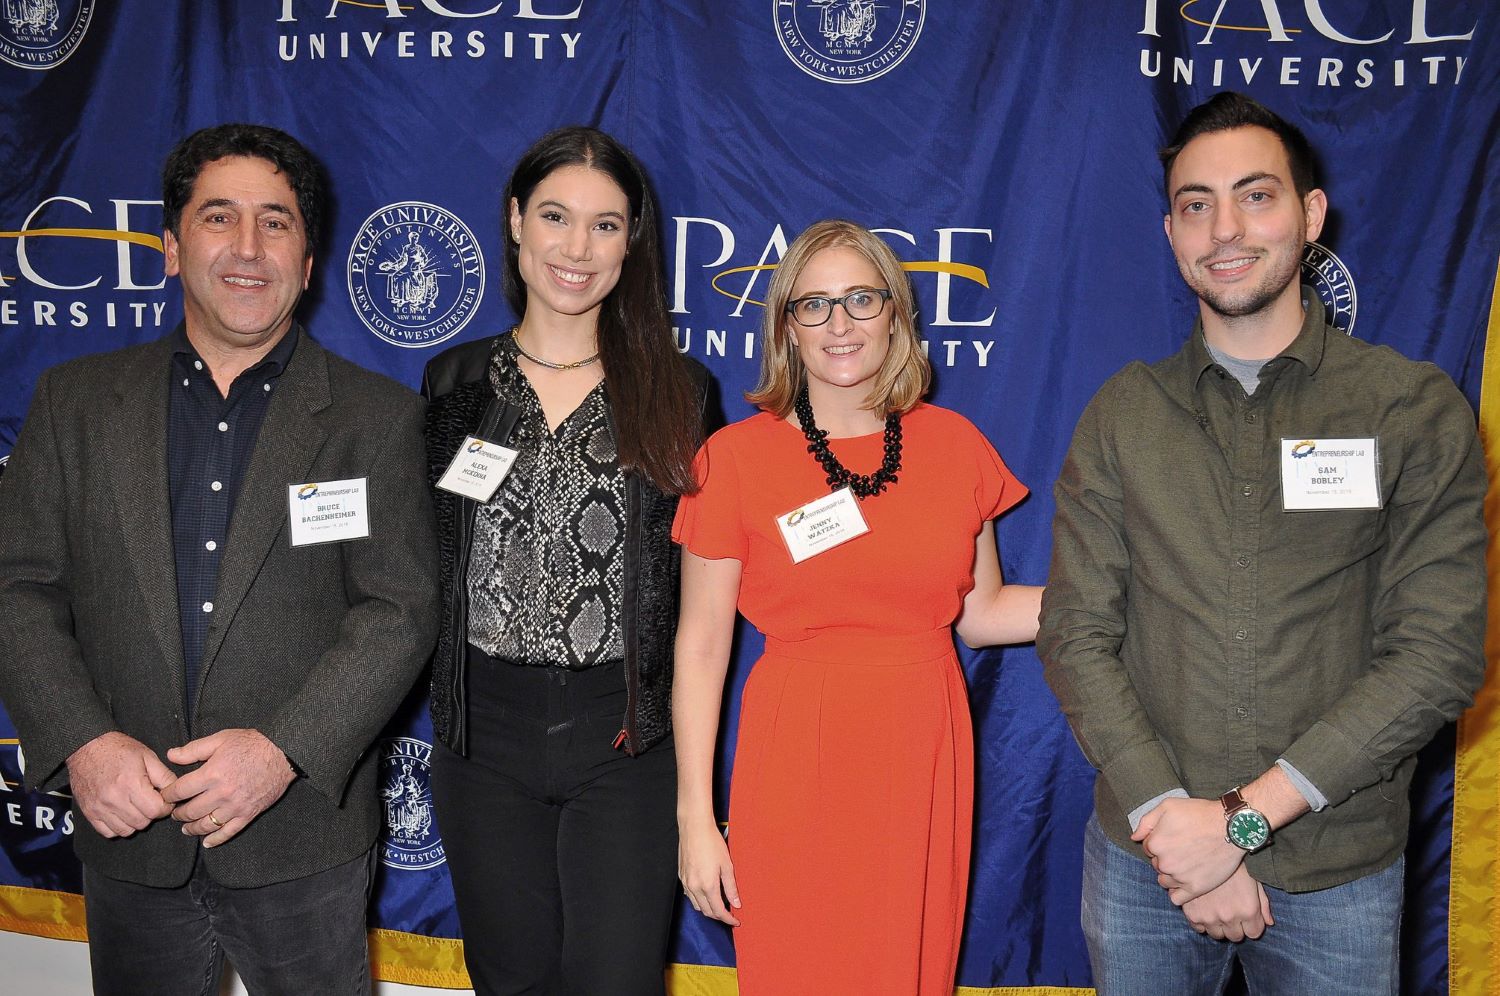 Ocrolus CEO at an Entrepreneurship event at Pace University